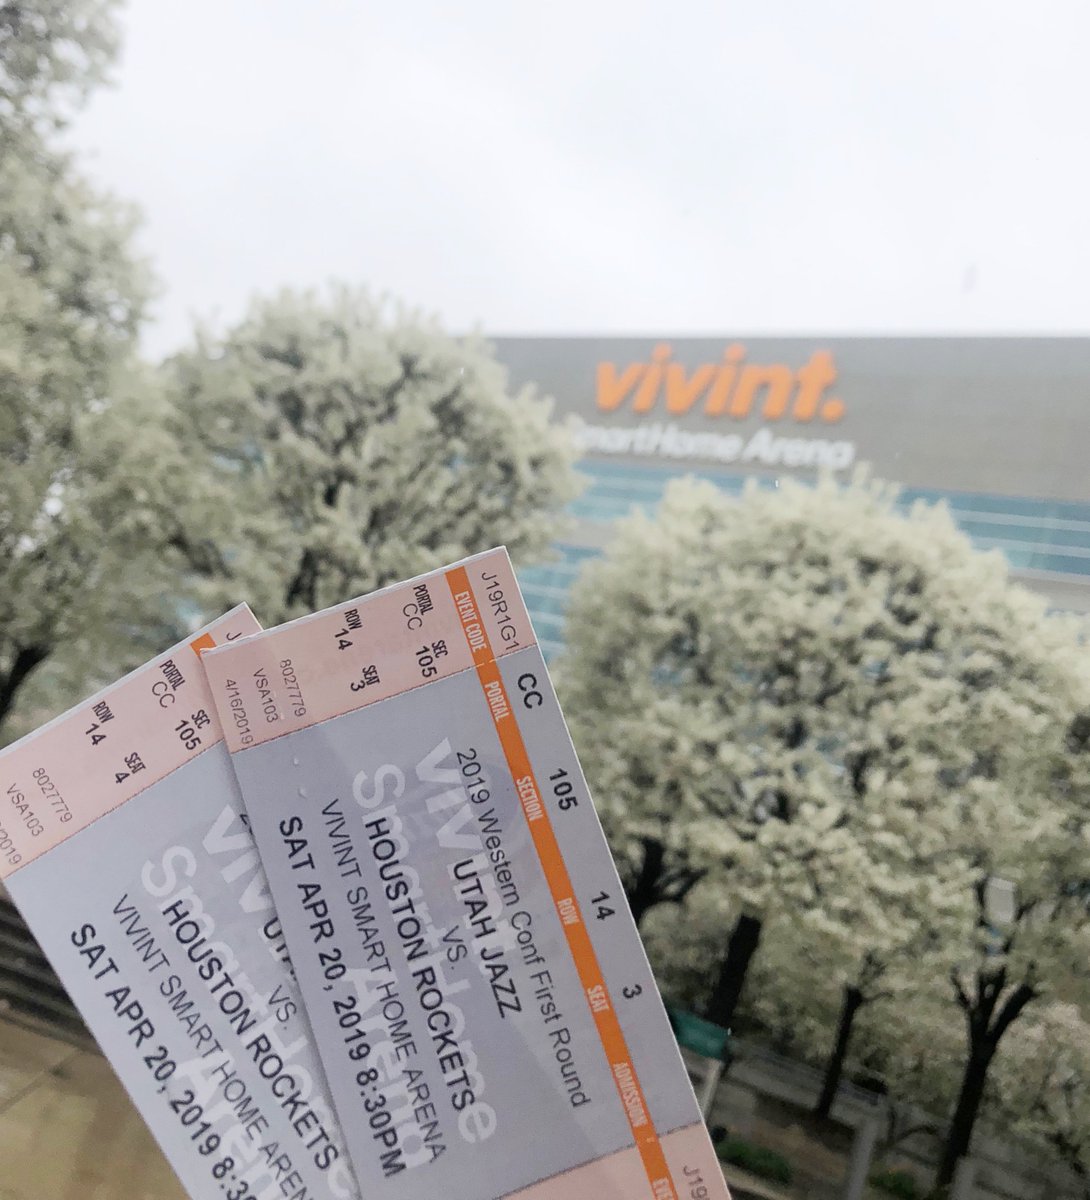 GIVEAWAY: Win 2 tickets to the playoff home opener PLUS vouchers to eat anywhere in the arena! To enter: To enter: 1️⃣Follow @kslnewsradio 2️⃣RT 3️⃣Tag a friend *Winner will be notified 4/19 at 2pm